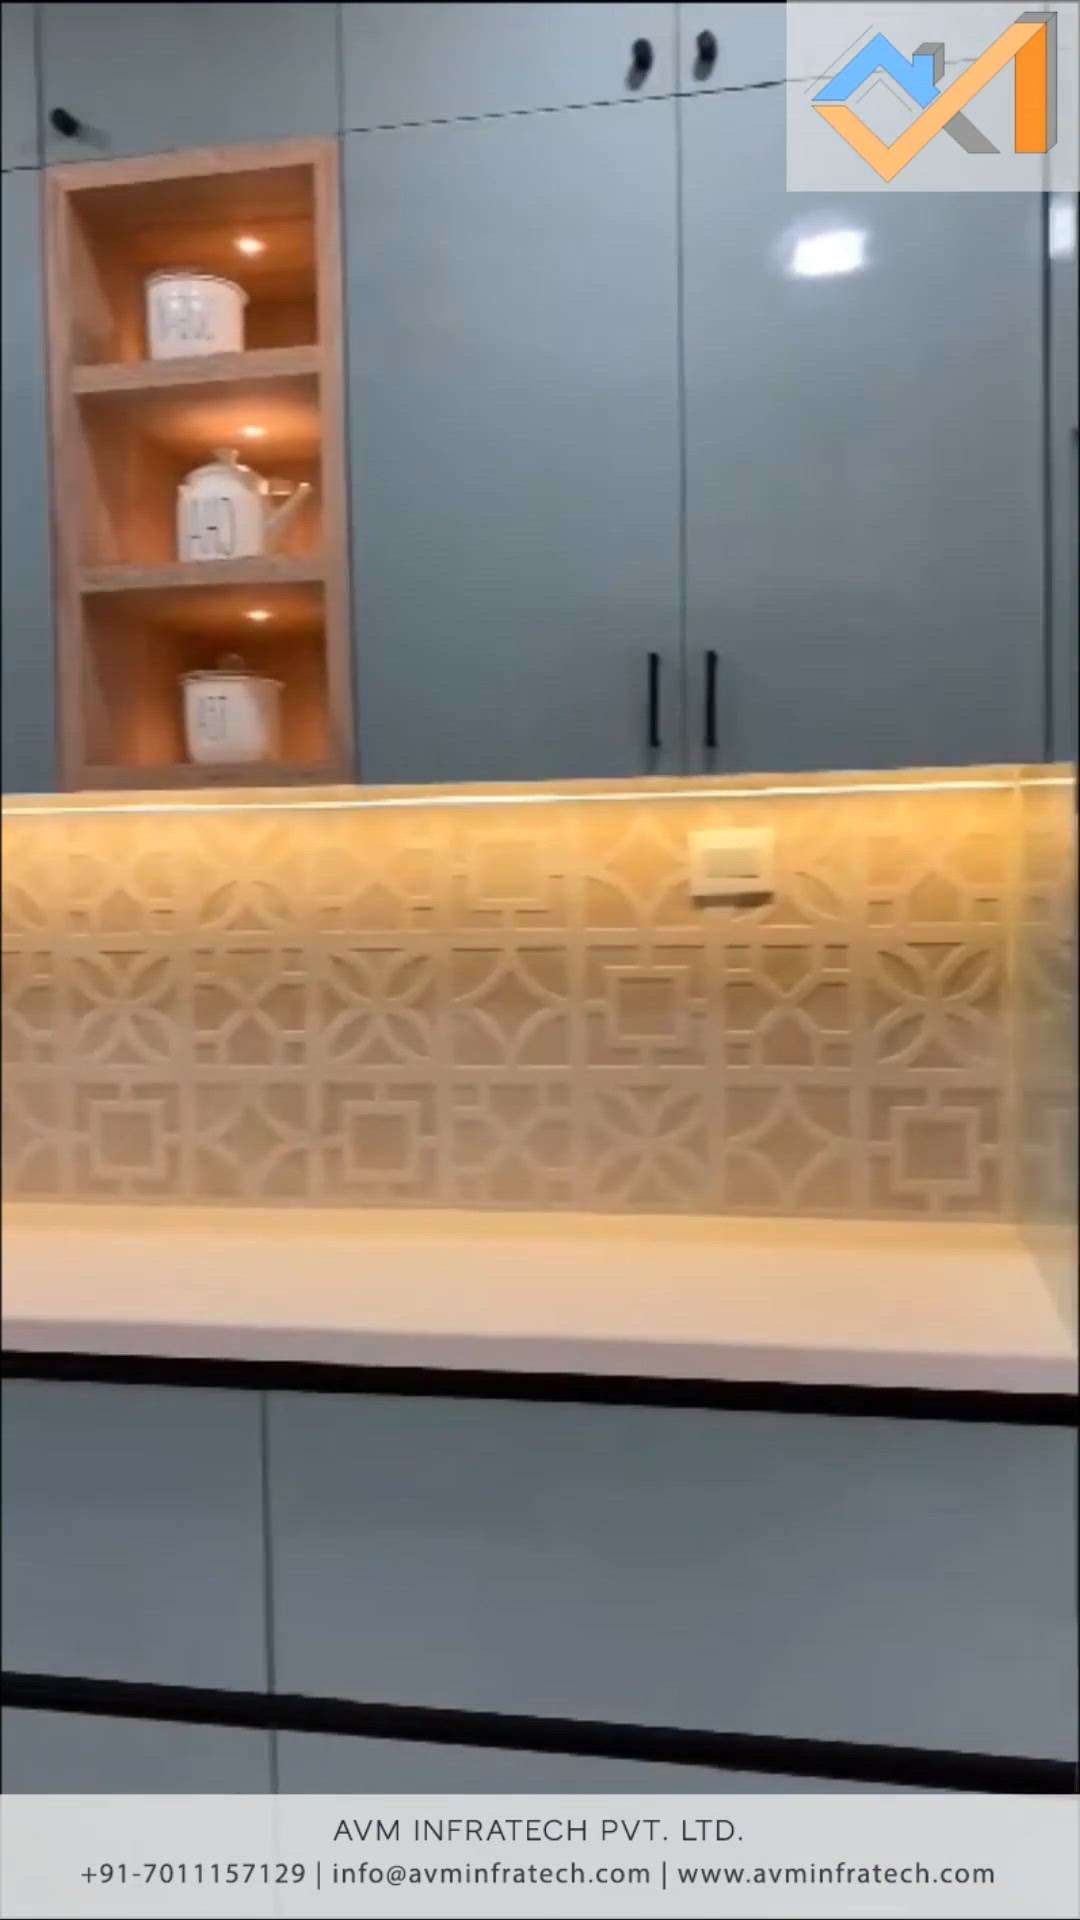 Modular kitchen! Unique colour shade.


Follow us for more such amazing updates. 
.
.
#modular #modularhome #modularkitchen #modularhomes #modularhouse #modularkitchens #modulardesign #modularbuilding #modulares #modularkitchendesigns #avminfratech #kitchen #kitchendesign